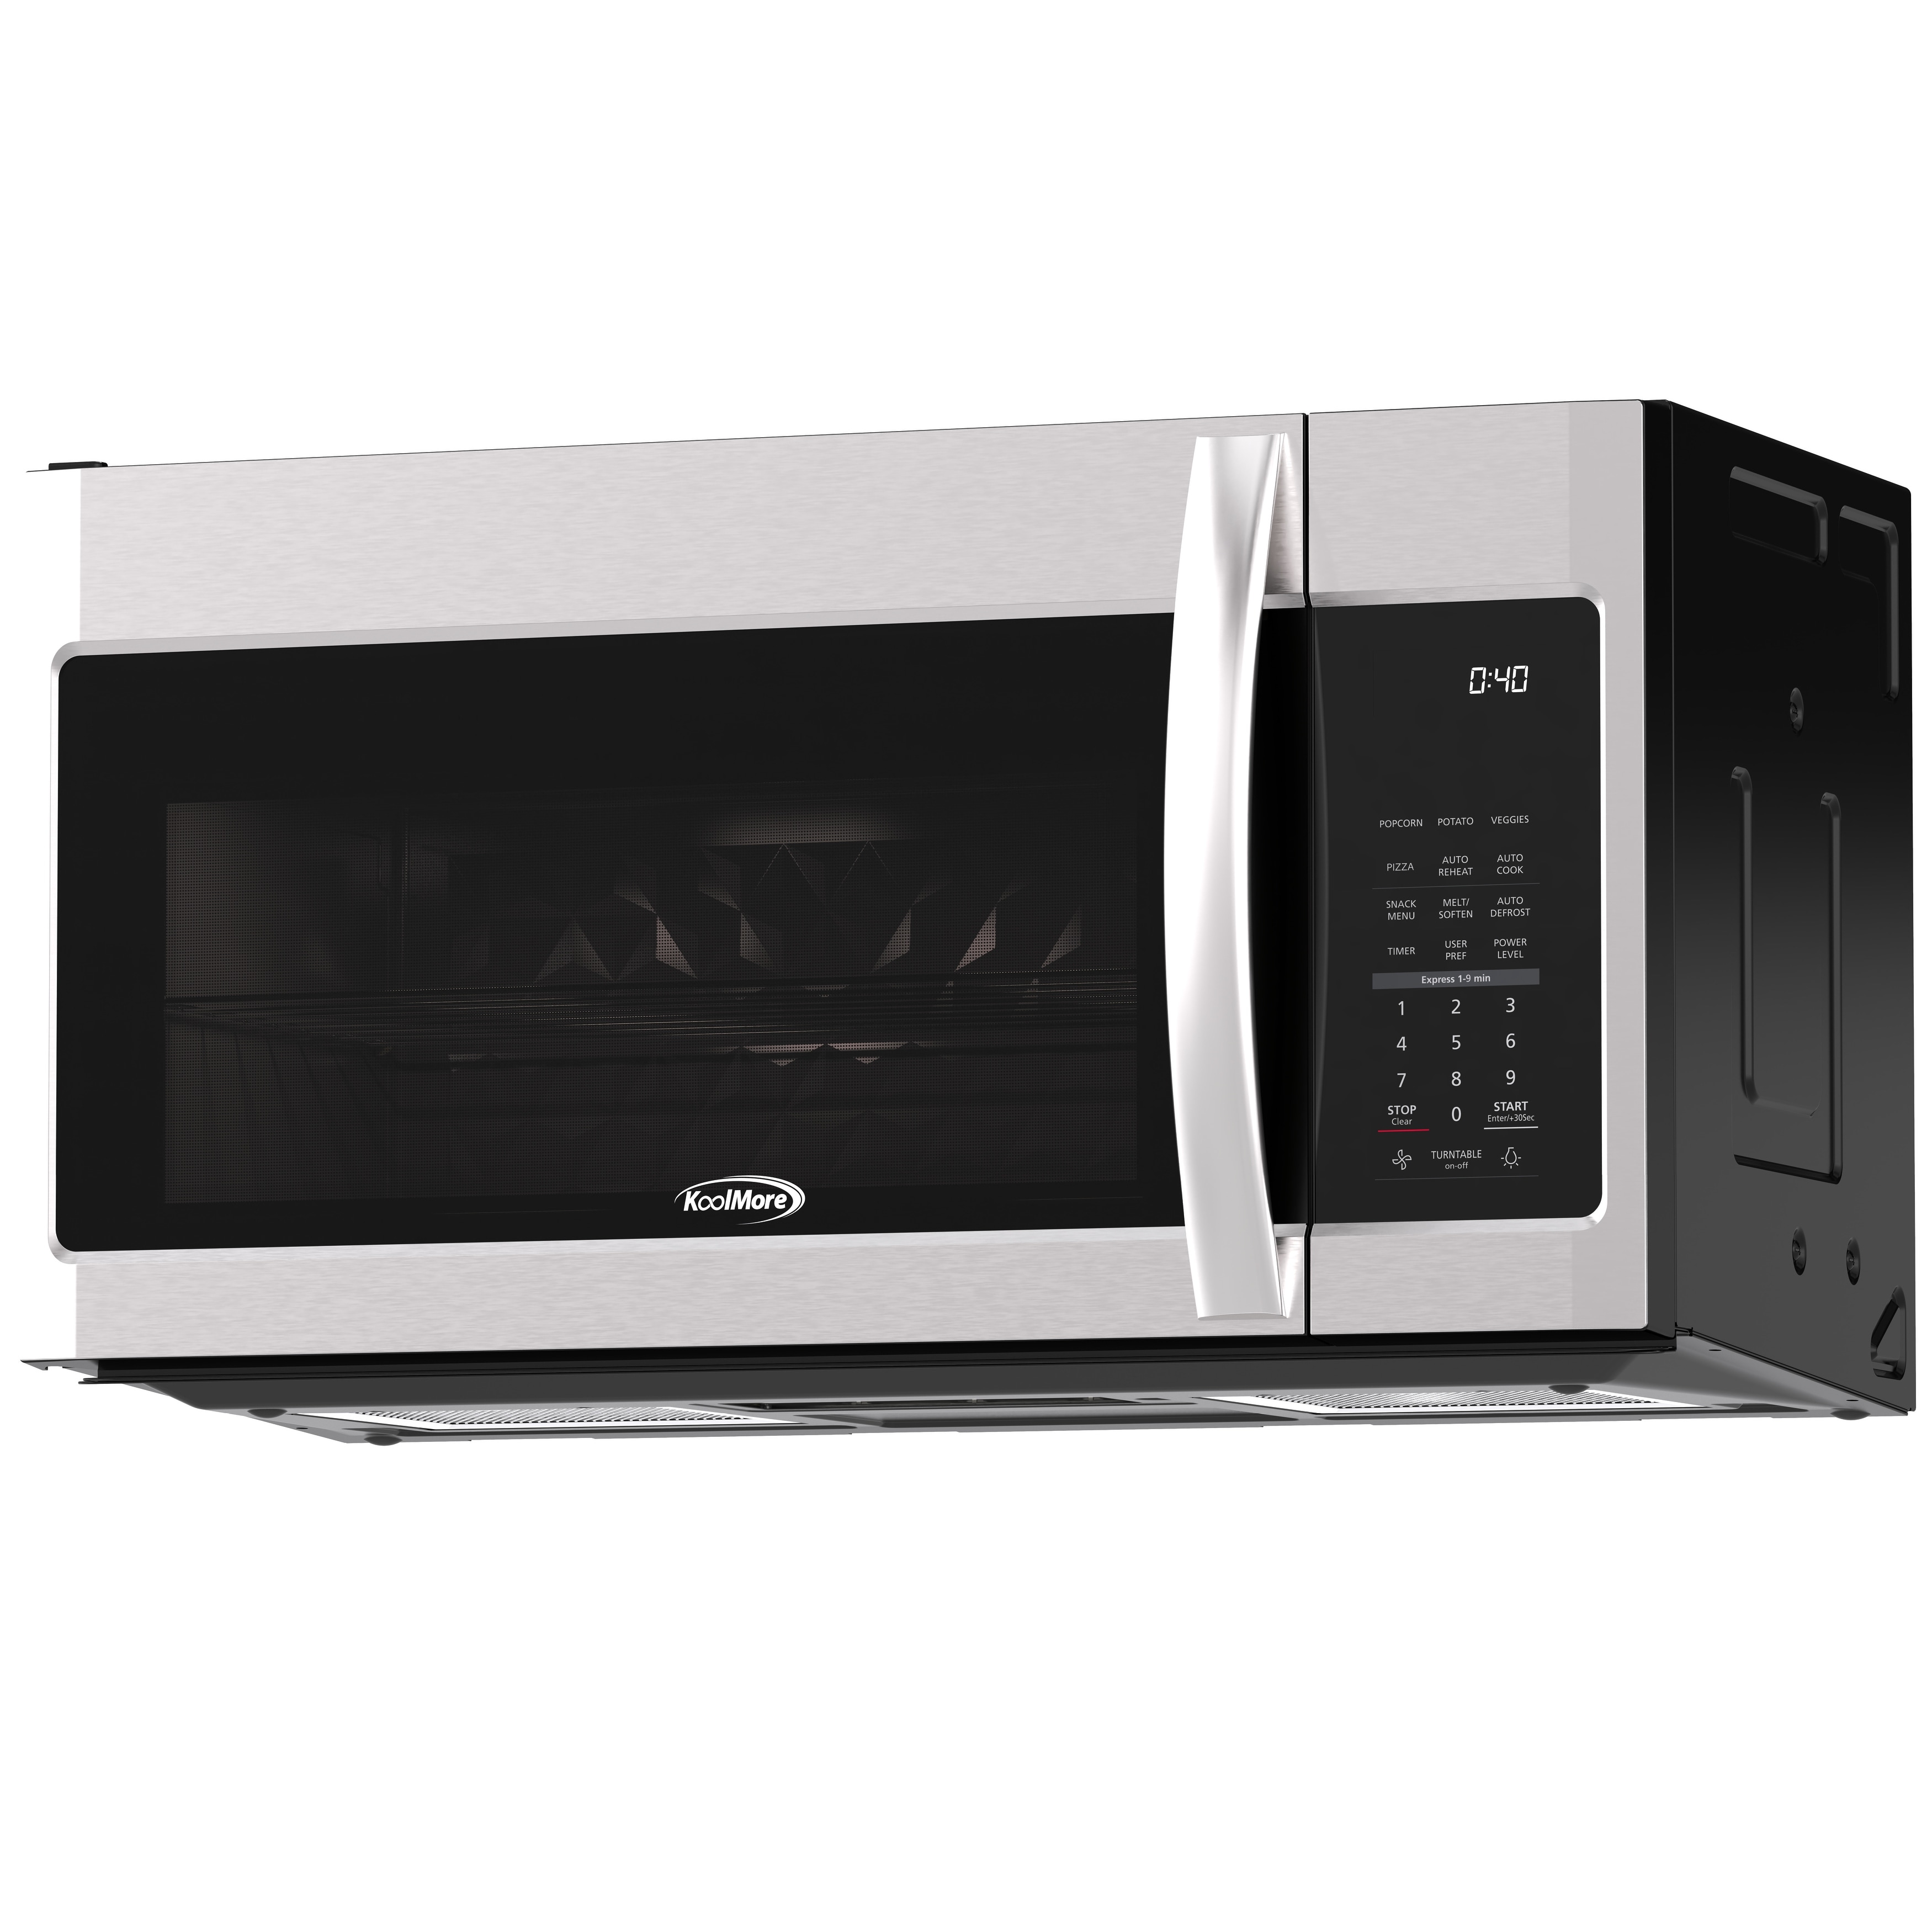 https://ak1.ostkcdn.com/images/products/is/images/direct/cbe4bfbd30e45477af68f41340ae69ede57afd62/1.9-Cu.-Ft.-Over-the-Range-Microwave-Oven-with-Oven-Lamp-and-300CFM-Recirculation-Vent-Hood-Function.jpg